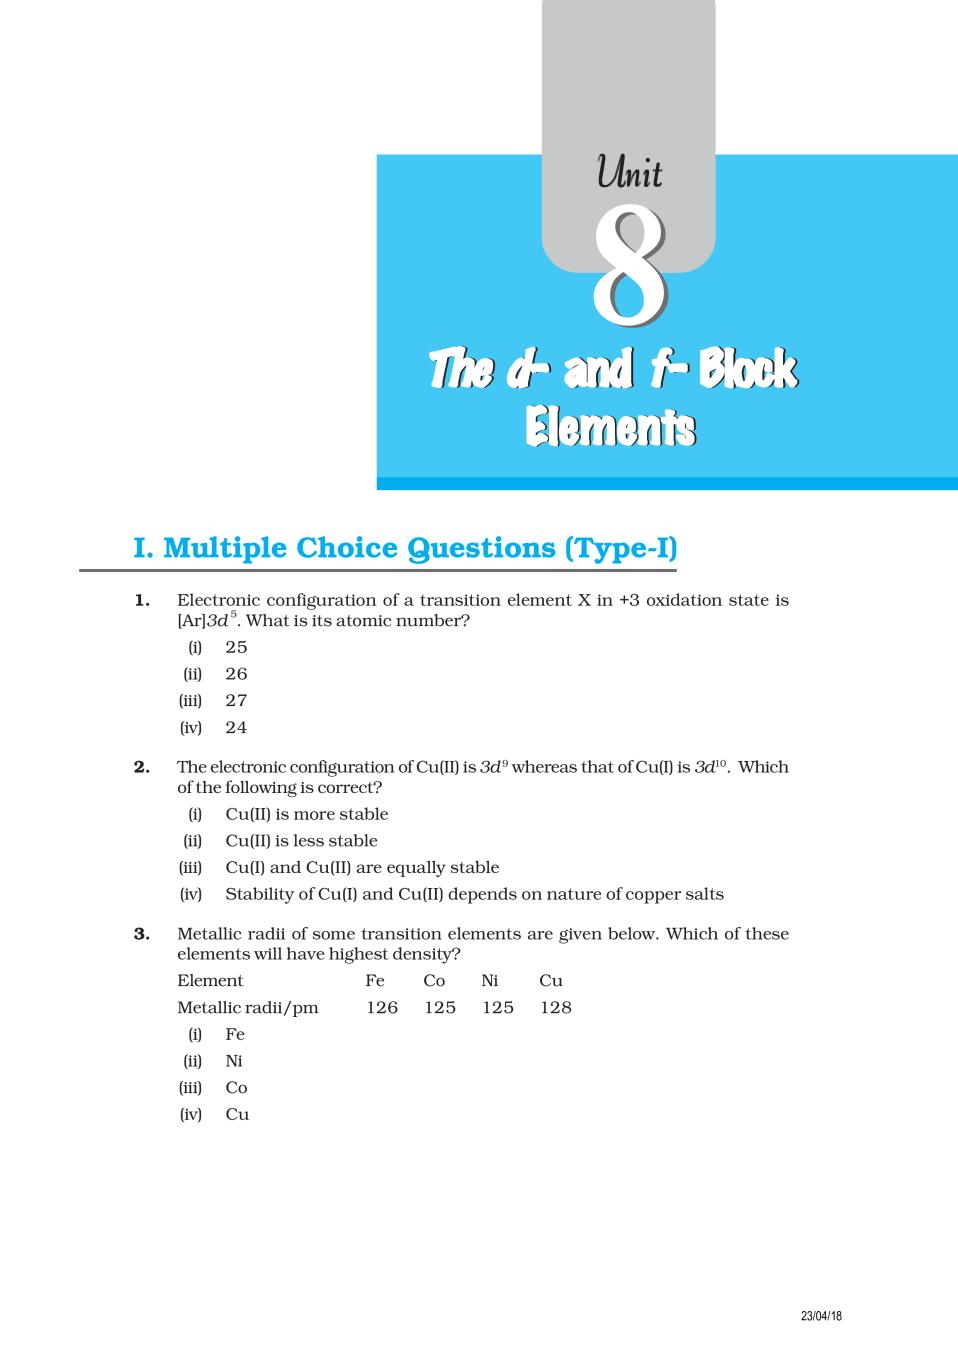 NCERT Exemplar Class 12 Chemistry Unit 8 The d-and f-Block Elements - Page 1